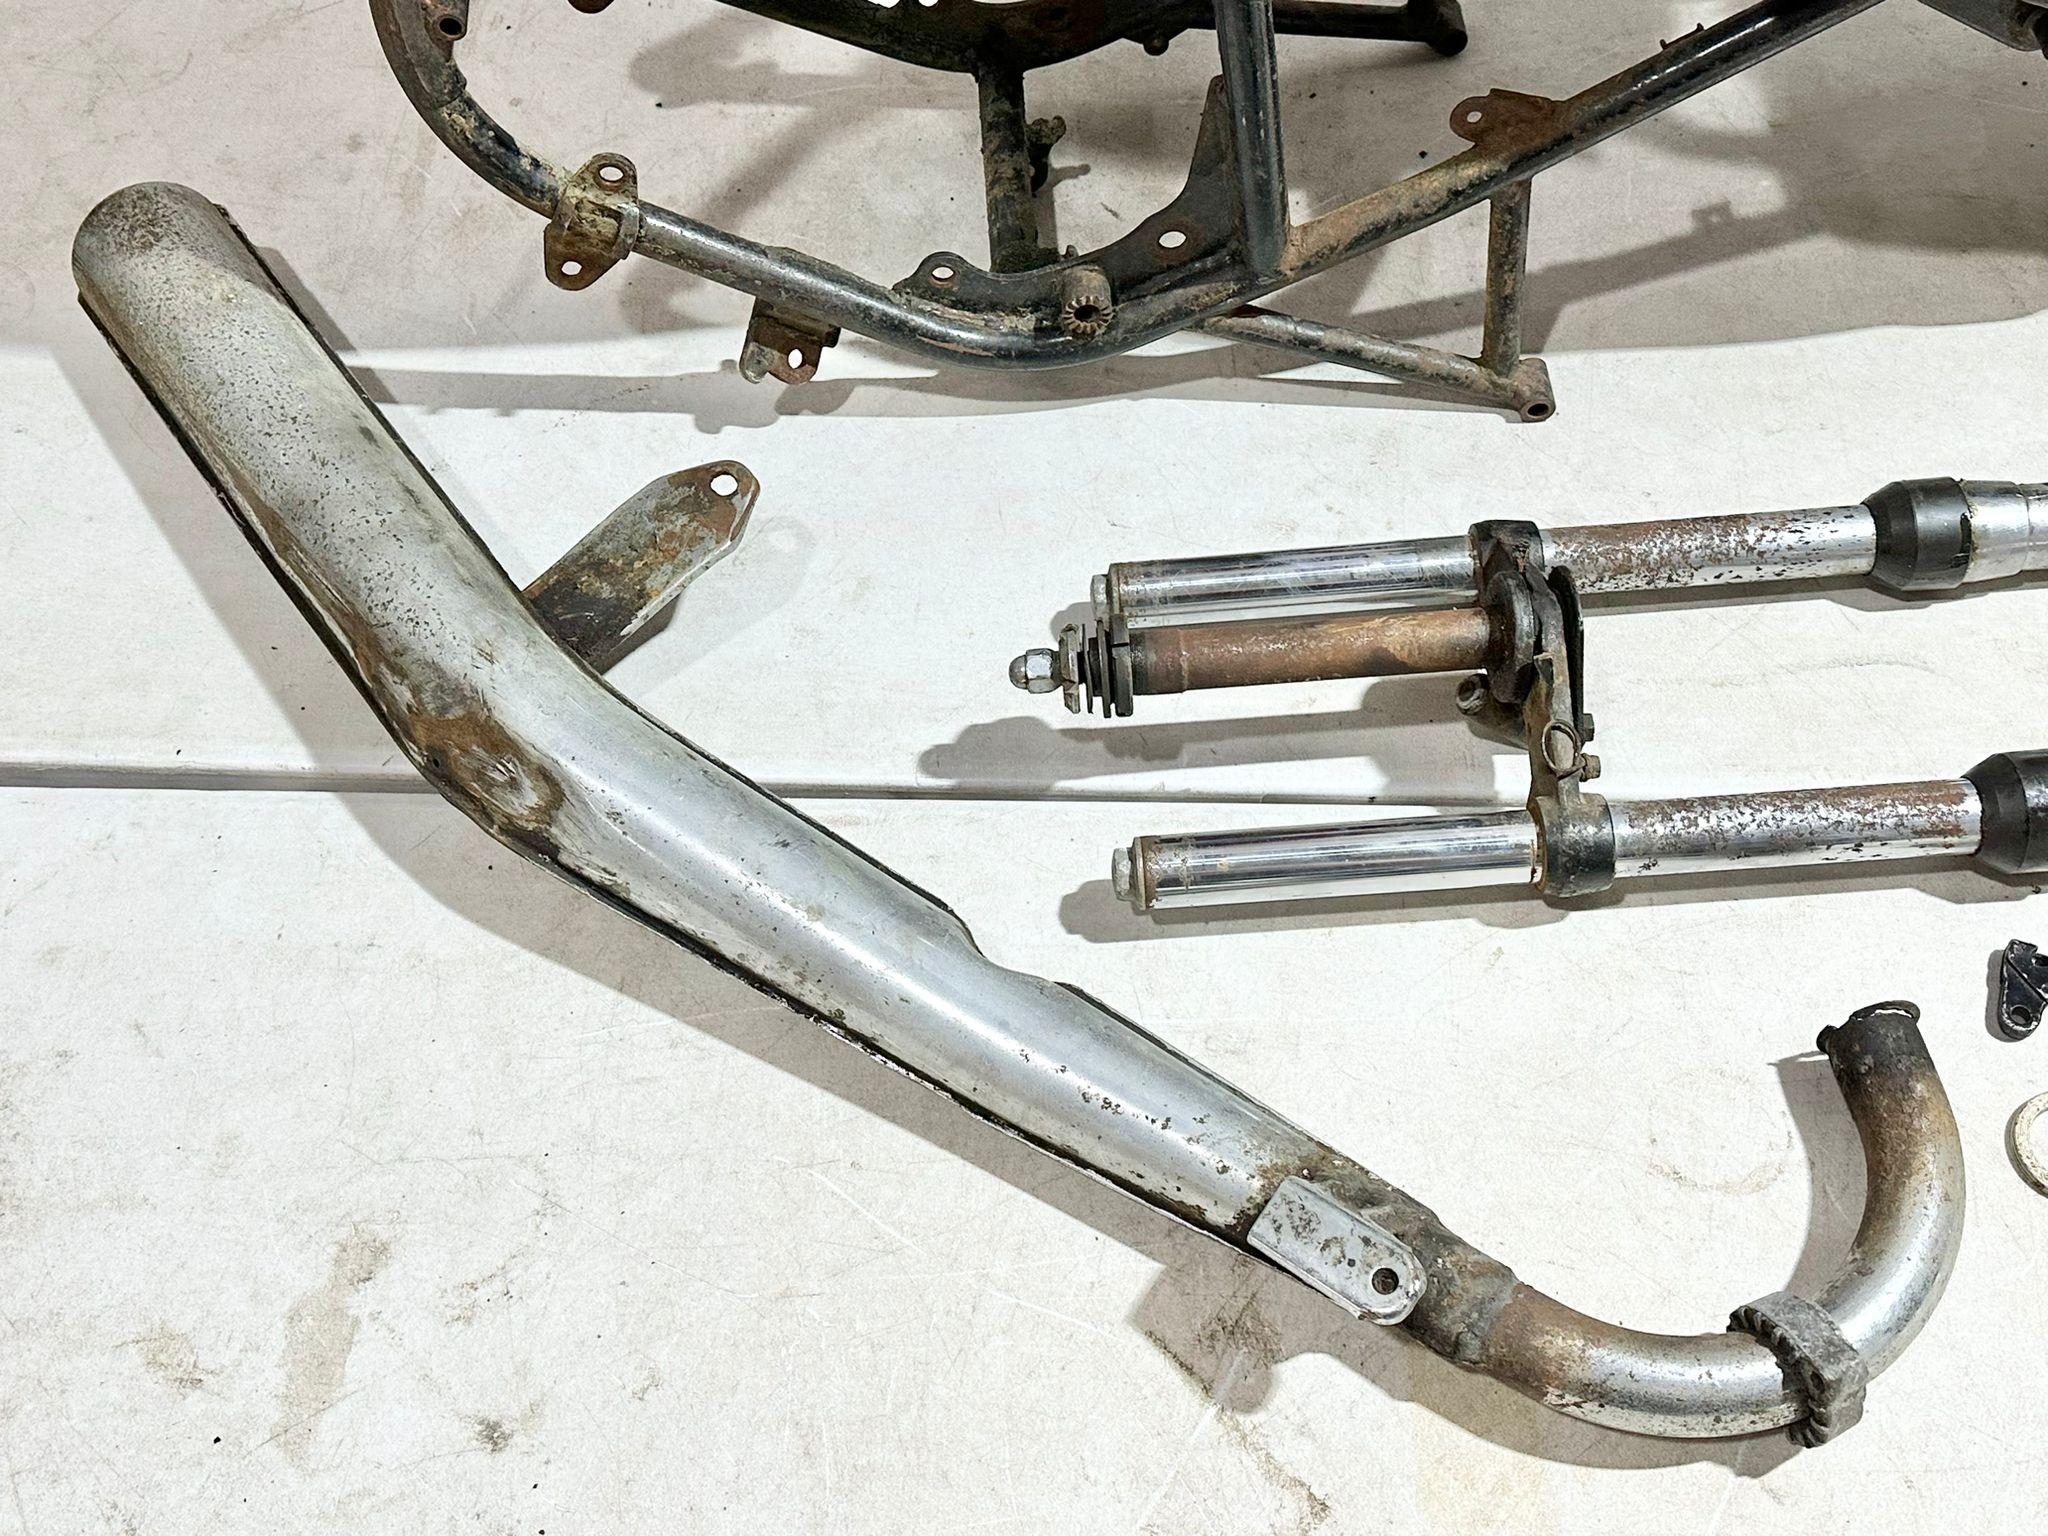 Kawasaki S2 350 frame with tank, seat, forks etc - Image 3 of 12